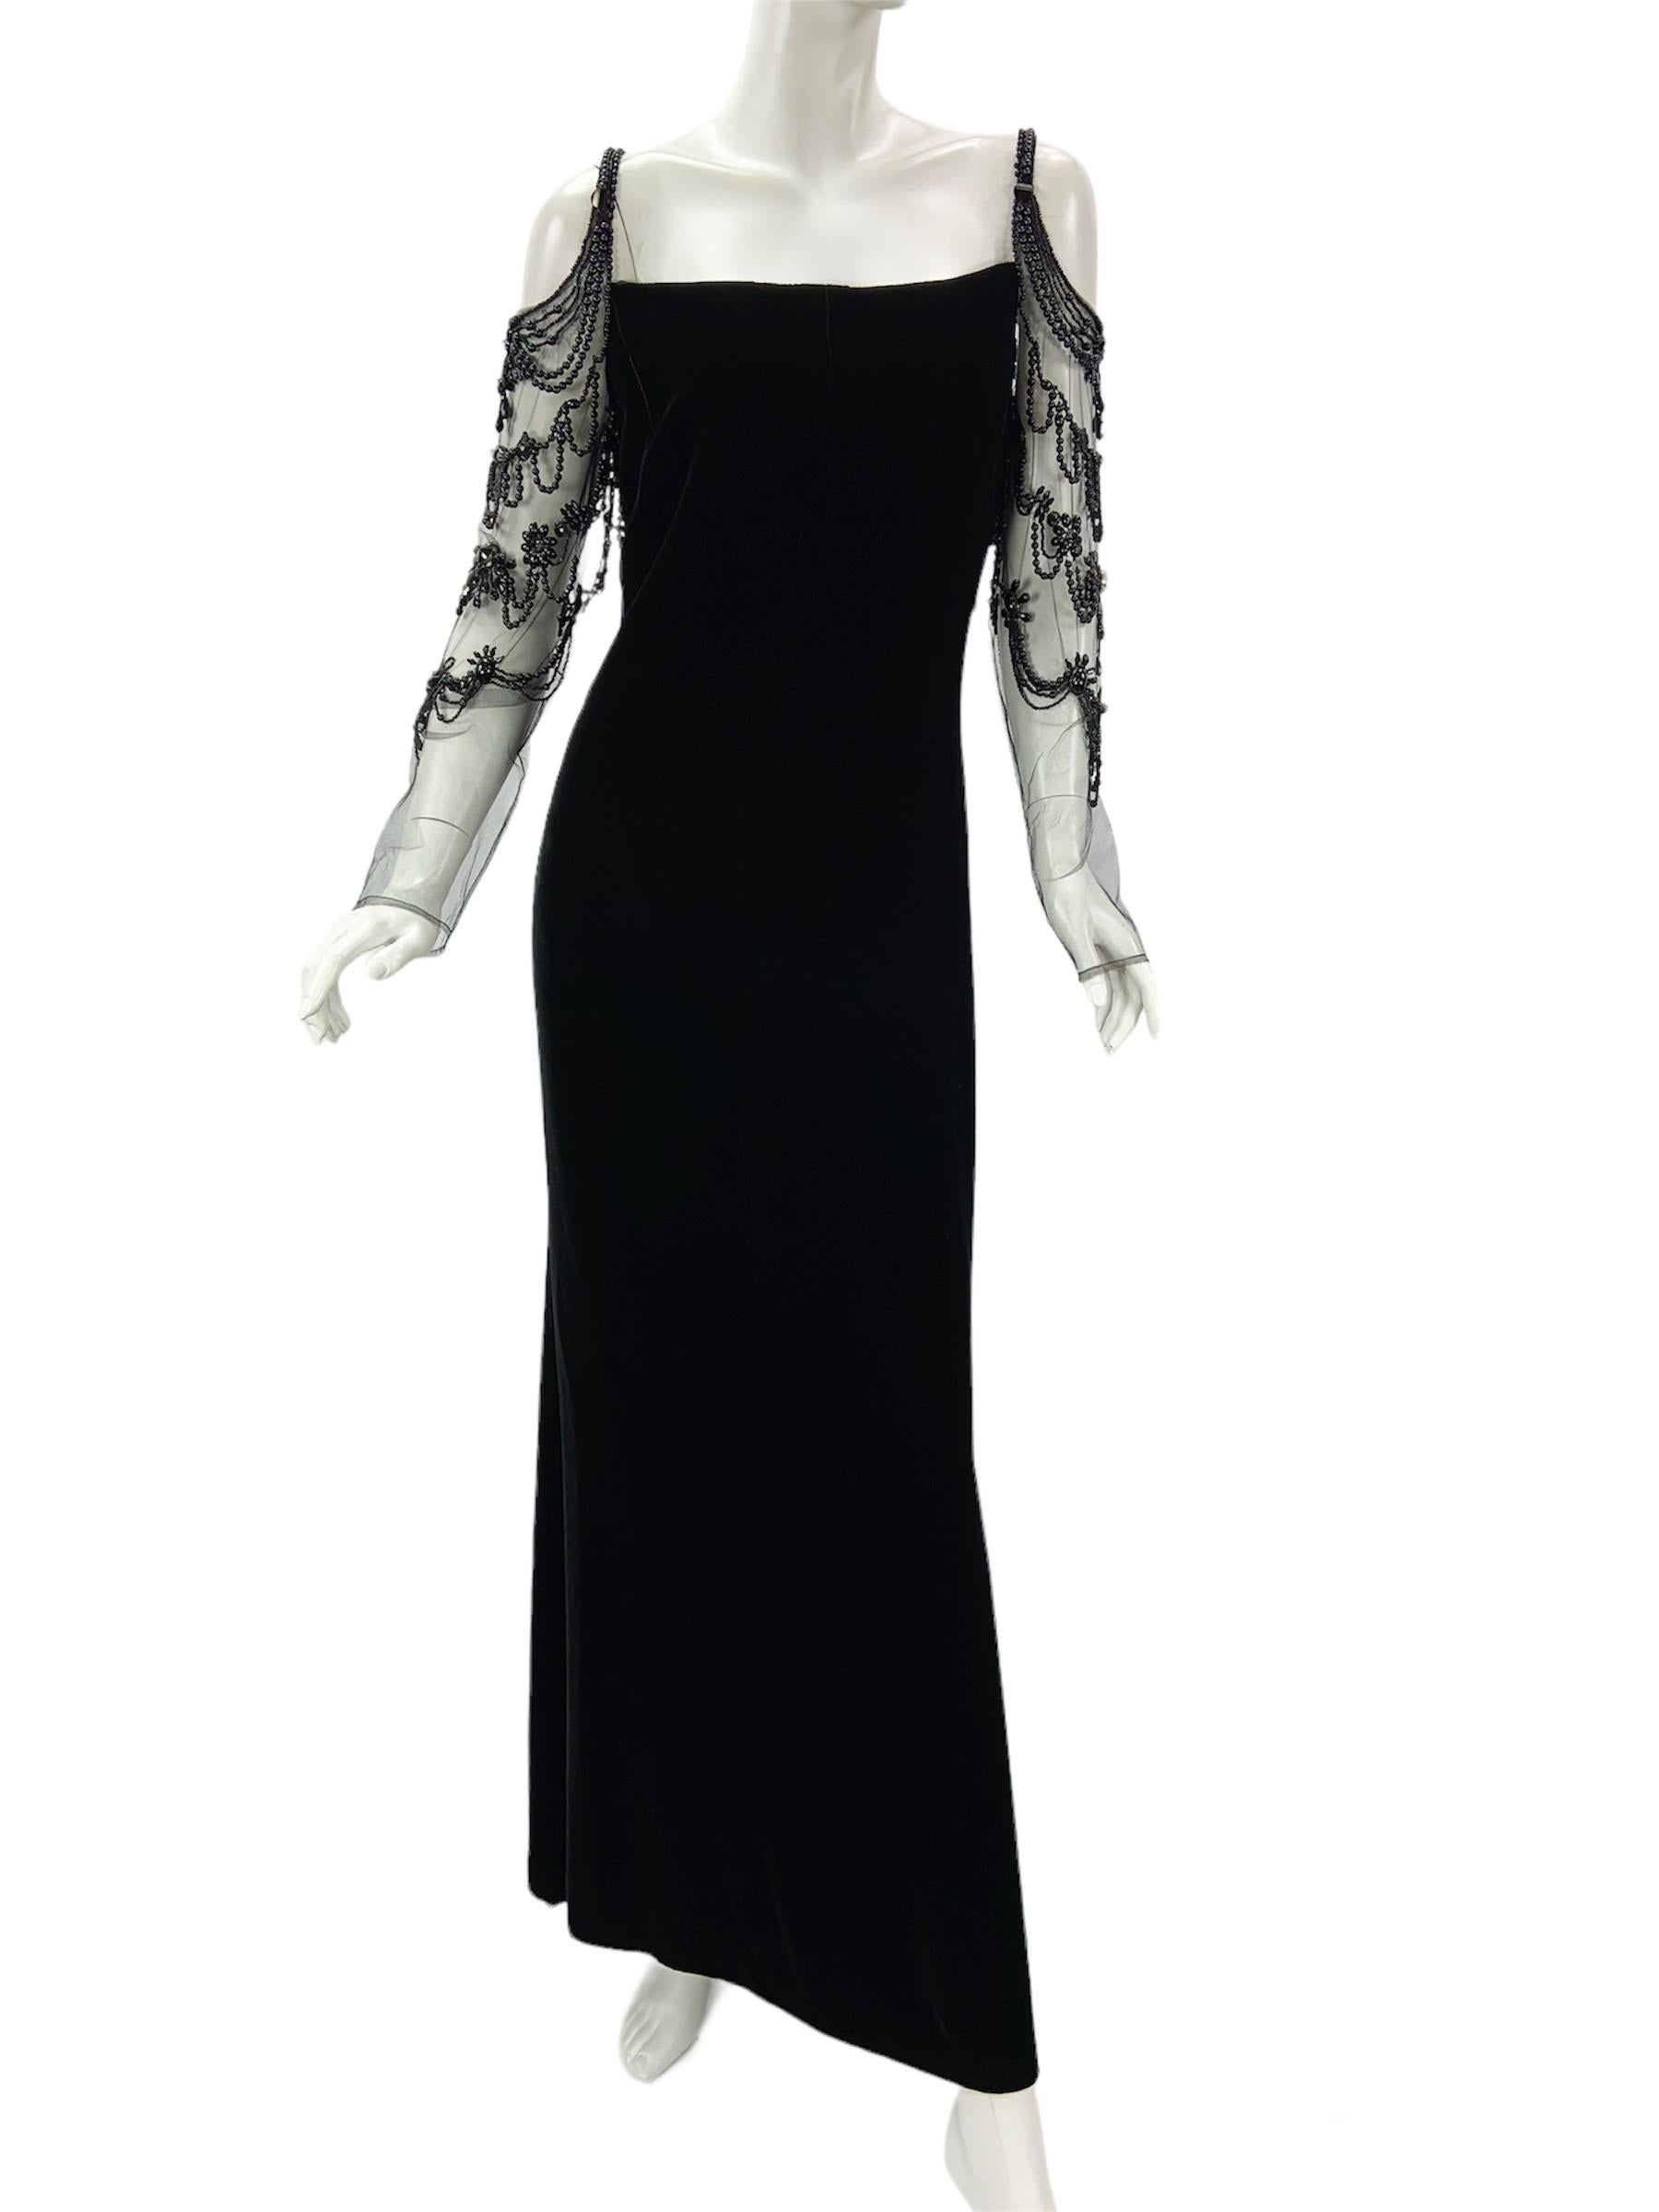 Valentino Black Velvet Beaded Maxi Dress Gown
F/W 2003 Runway Collection
US size - 8
Black velvet 20s inspired Gatsby dress finished with lots of black onyx cabochon and crystals over the tulle. Fully lined, Side zip closure.
Measurements: Length -